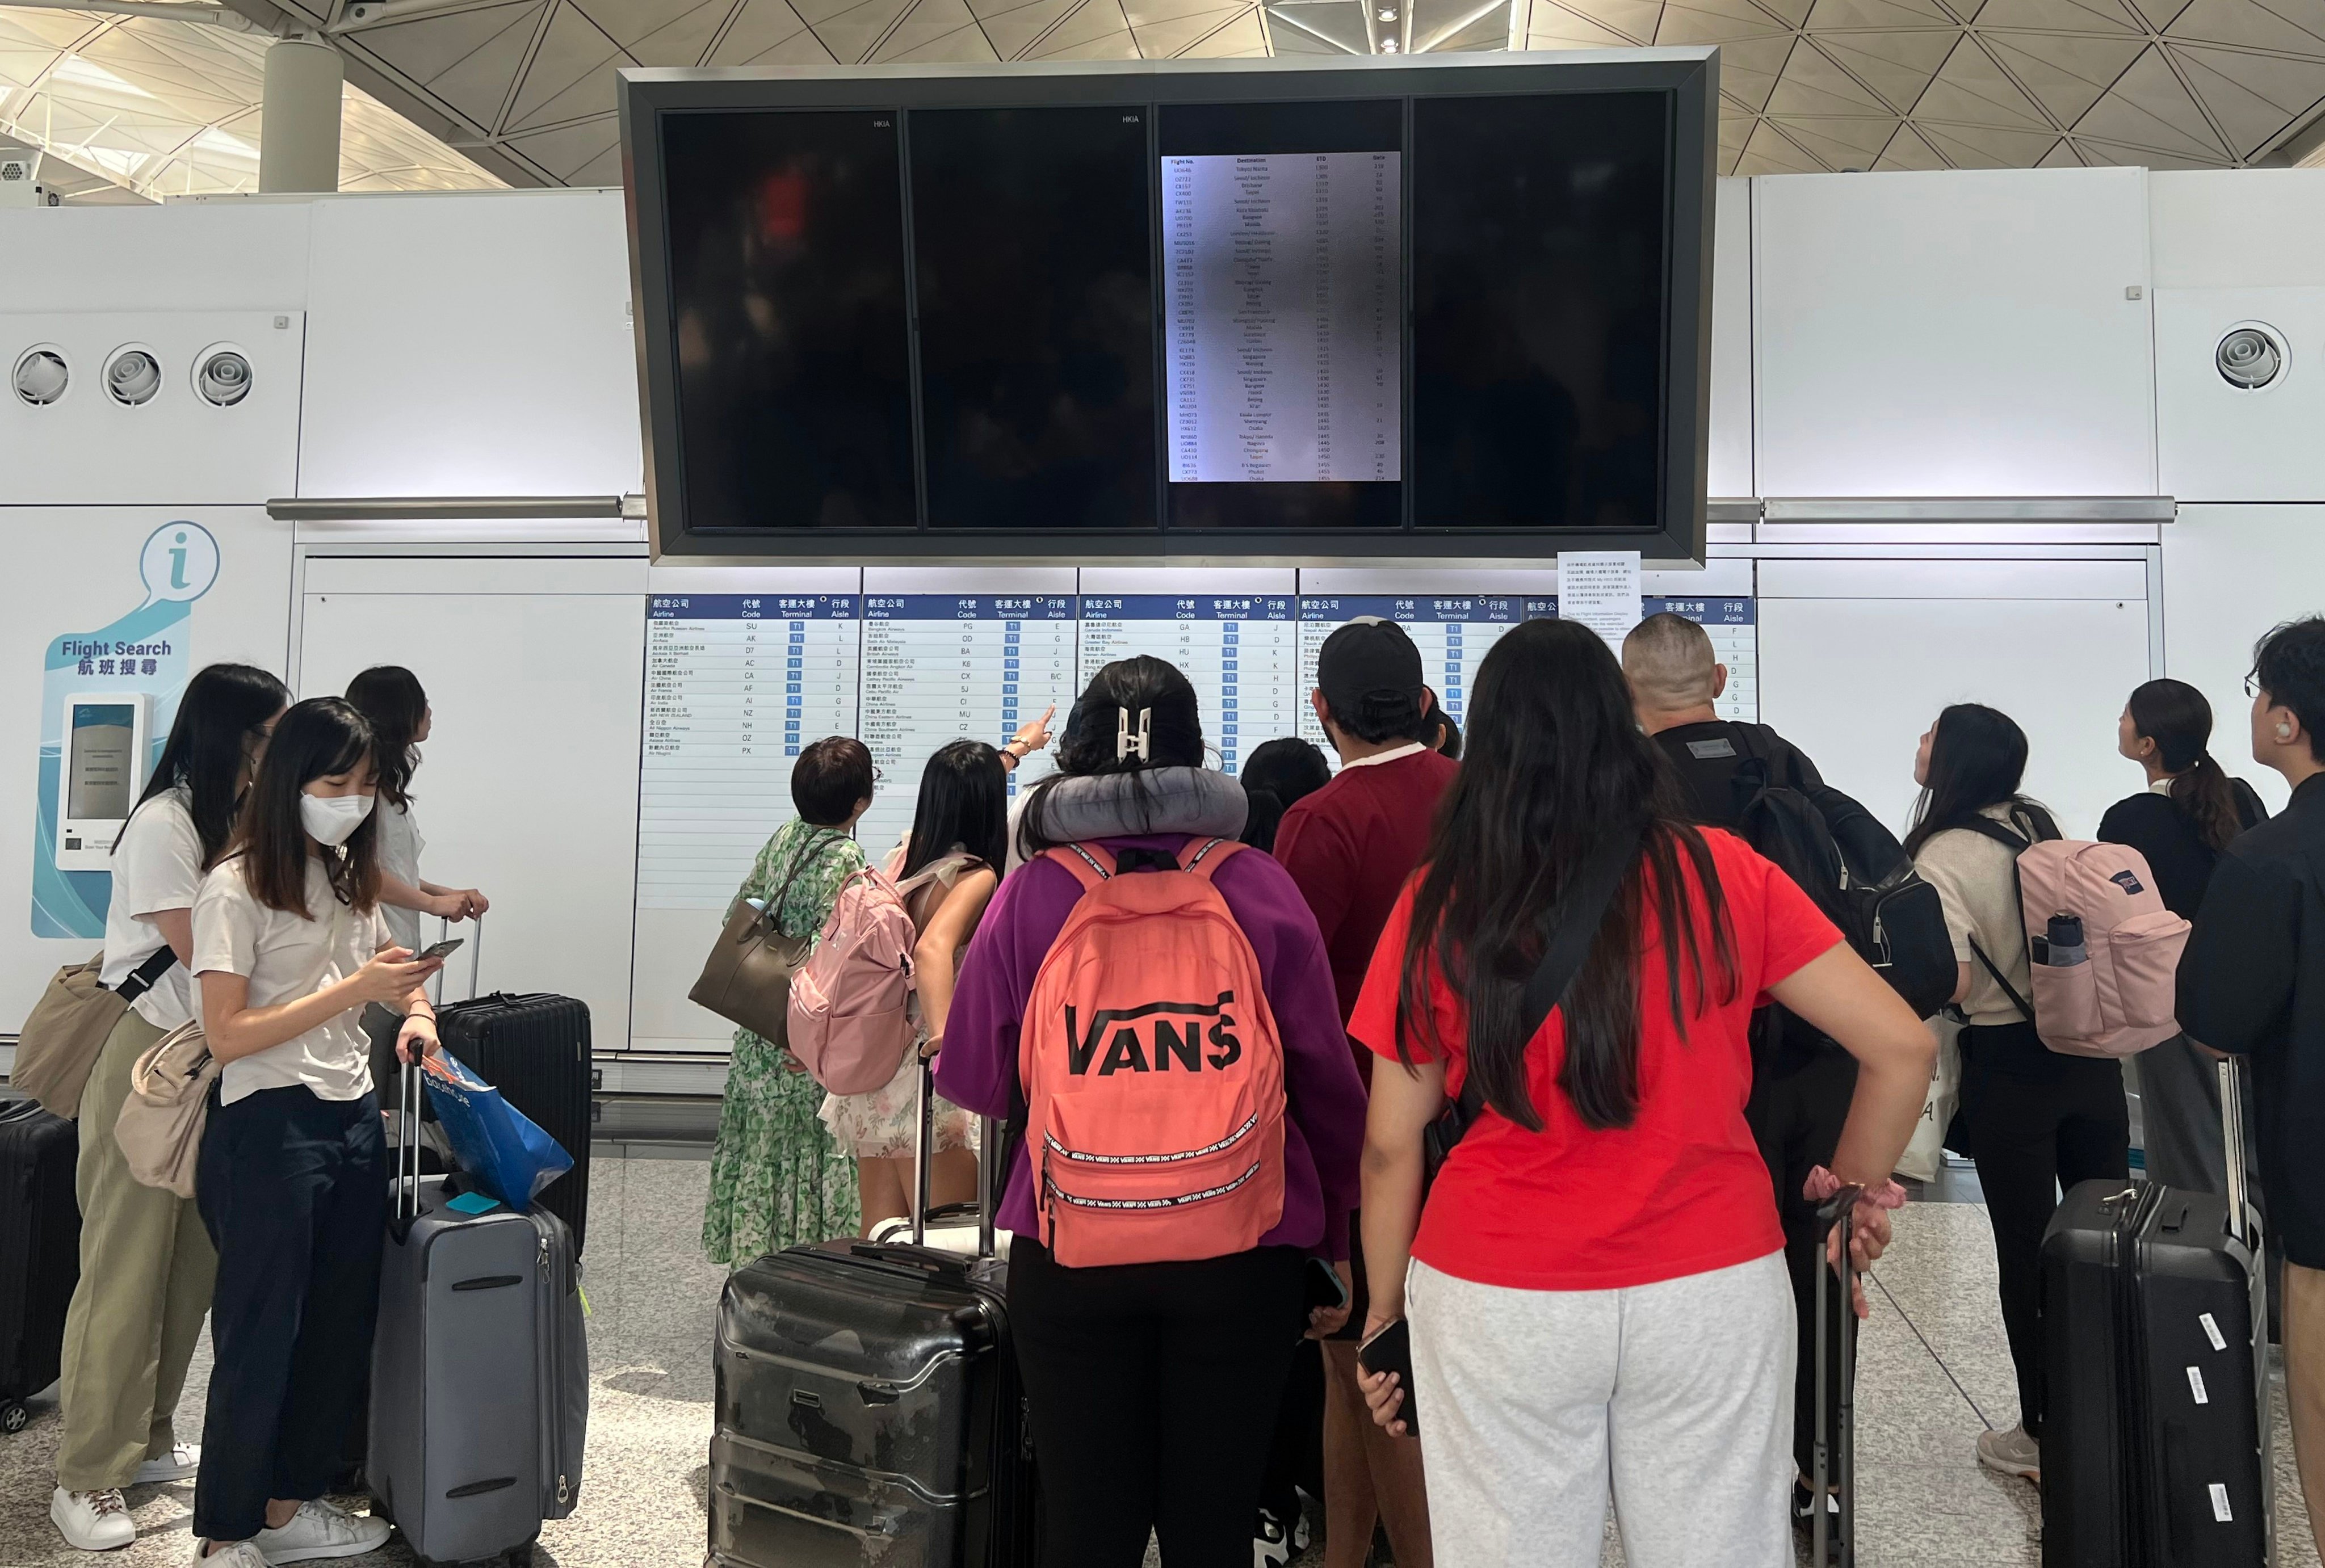 The systems failure paralysed flight and baggage collection information and on digital platforms for more than nine hours.. Photo: Willa Wu